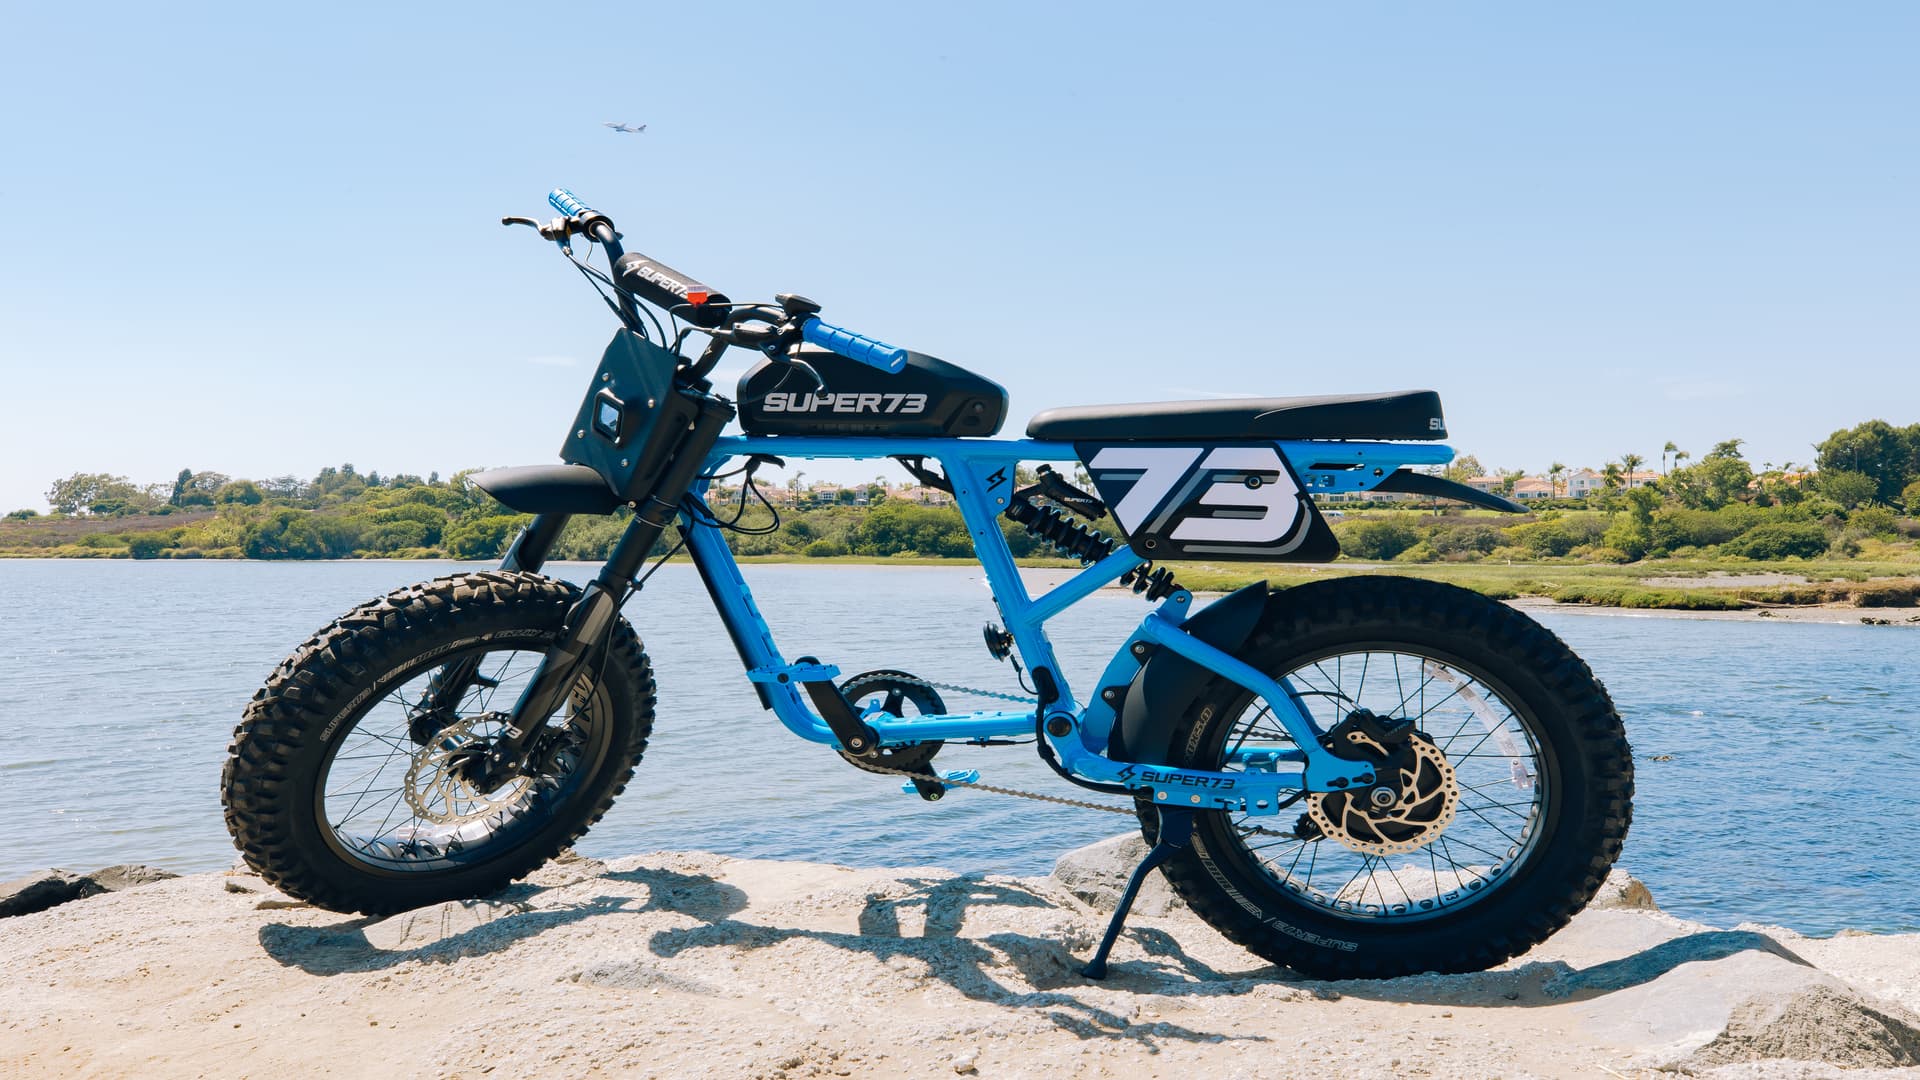 Super73 Blu Tang ebike parked by the lake